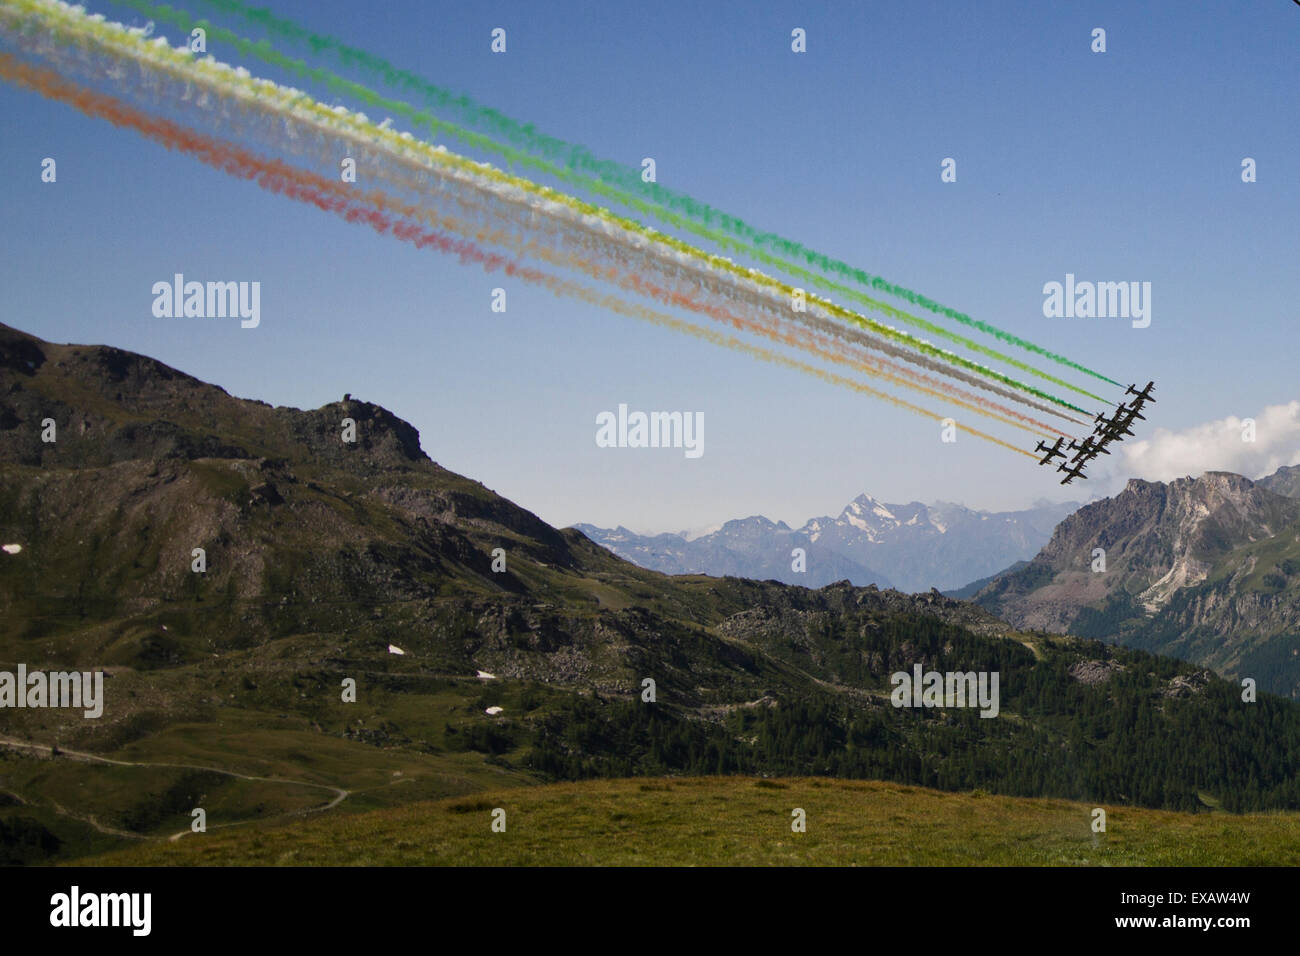 Cervinia, Italy. 10th July 2015. The acrobatic team 'Frecce Tricolori' of the Italian Air Force draws the Italian flag with smoke trails flying over Breuil-Cervinia. The event celebrates the 150 years of the first ascent of Matterhorn. Stock Photo